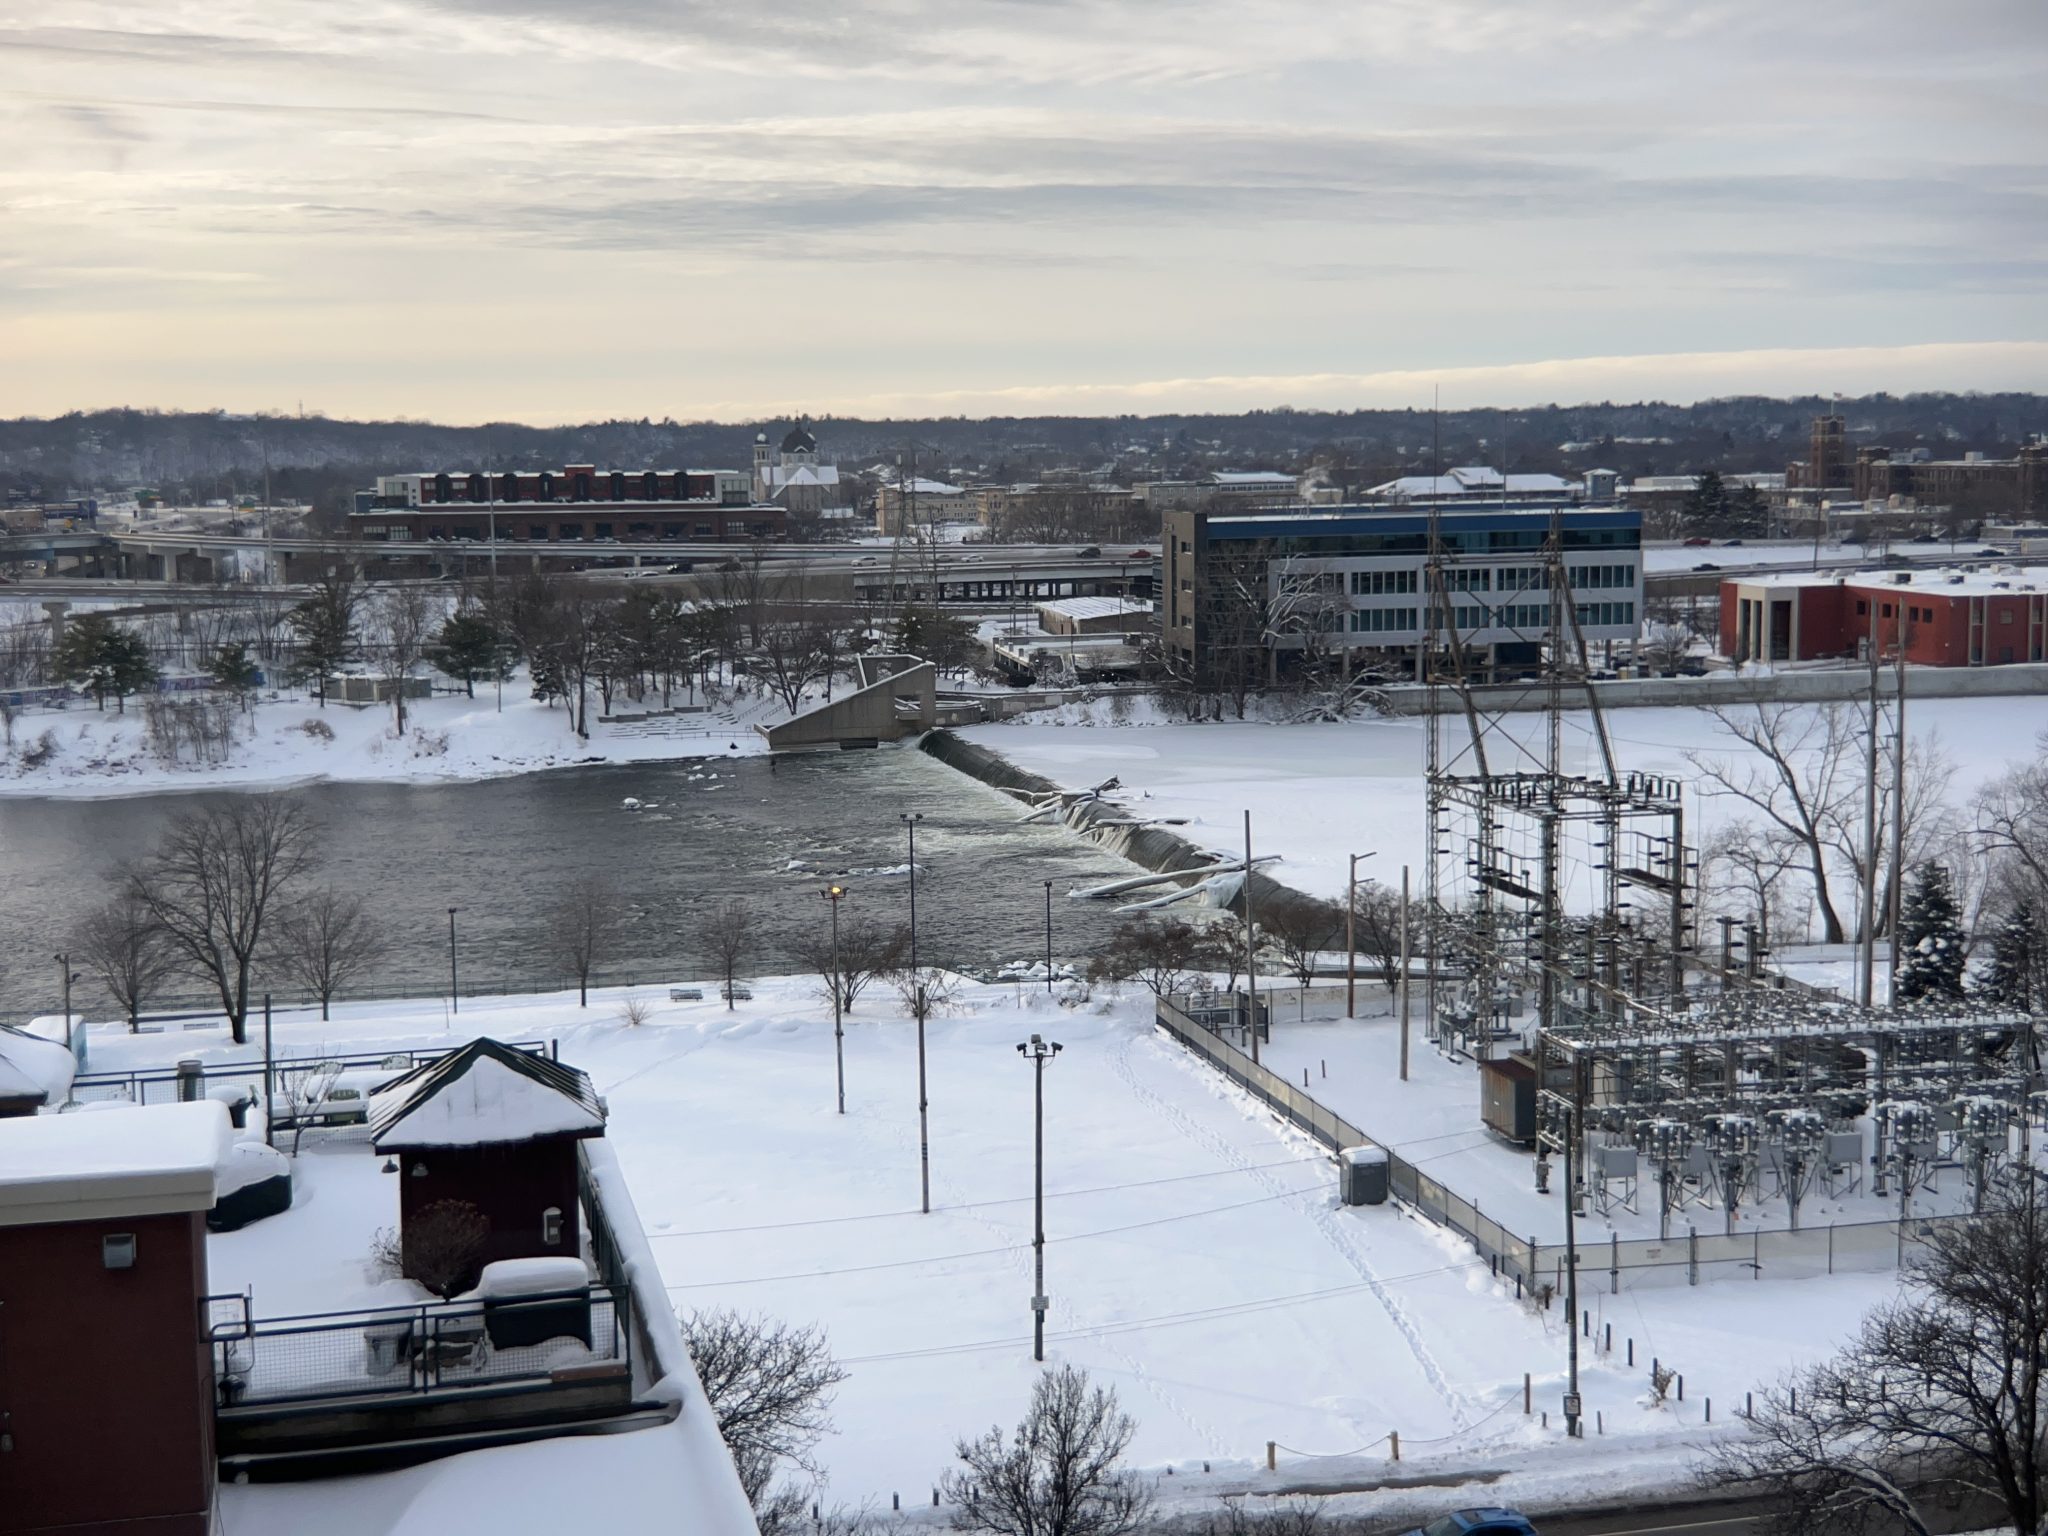 Snowy morning in Grand Rapids, Michigan, looking over the Grand River at the Fish Ladder